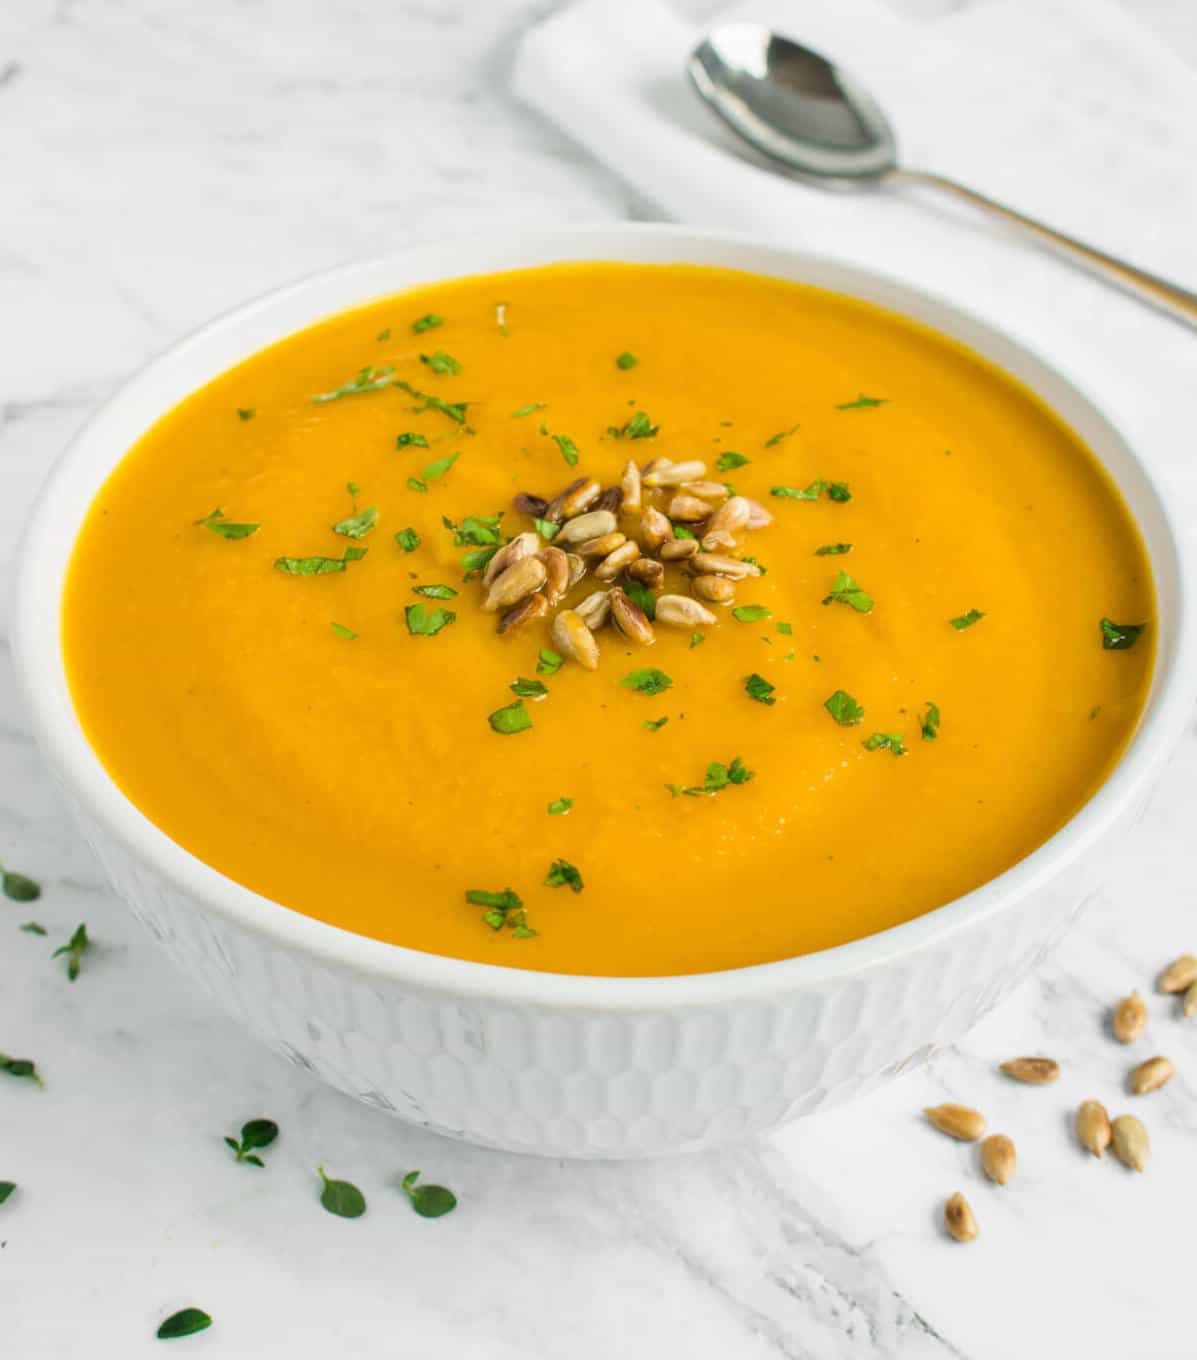 Pumpkin soup topped with toasted sunflower seeds and parsley